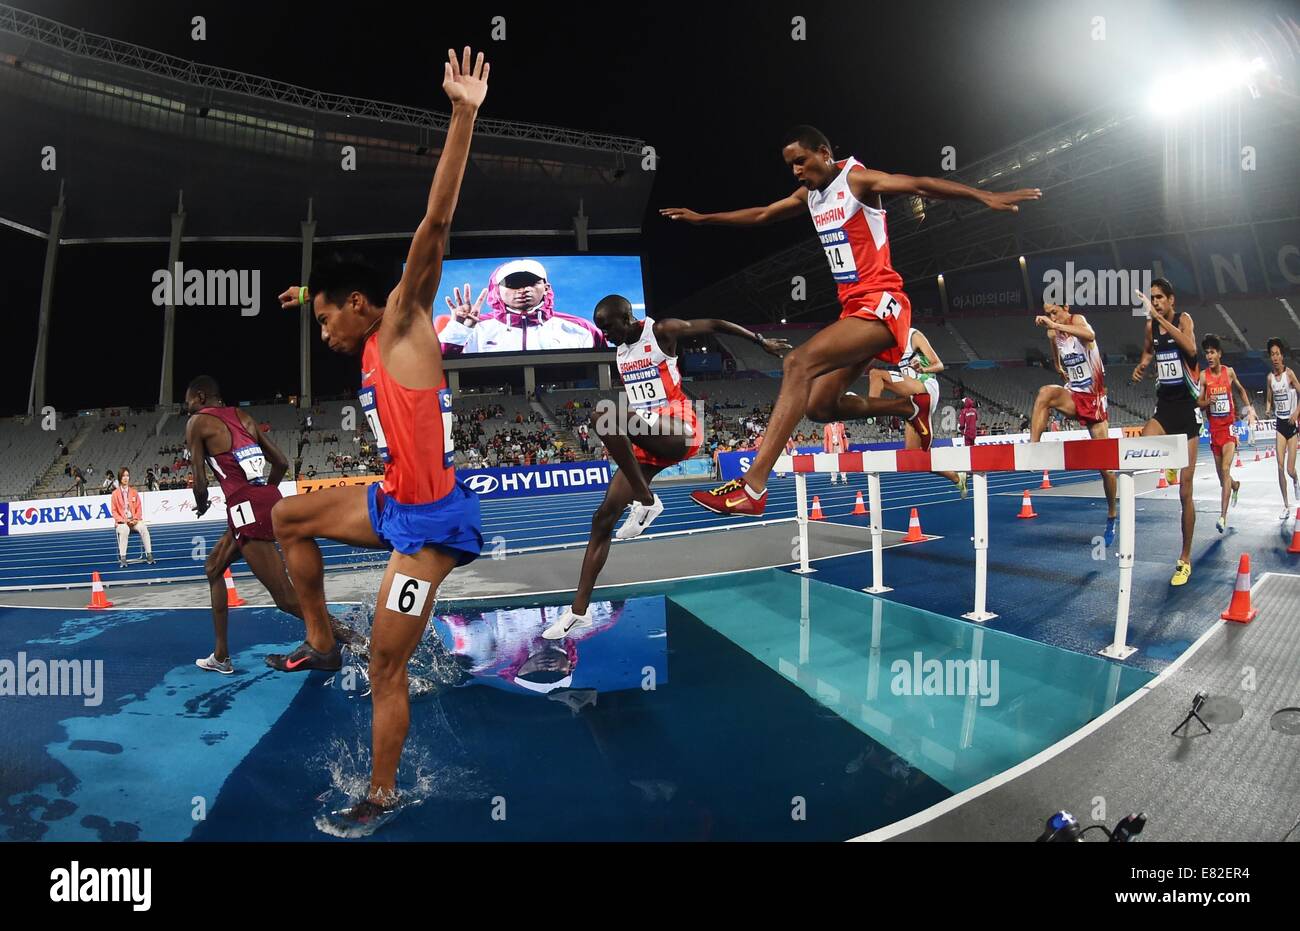 Incheon, South Korea. 29th Sep, 2014. Athletes compete during the men's 3,000m steeplechase final match of athletics at the 17th Asian Games in Incheon, South Korea, Sept. 29, 2014. Kamal Abubaker Ali of Qatar won the gold medal. © Lin Yiguang/Xinhua/Alamy Live News Stock Photo